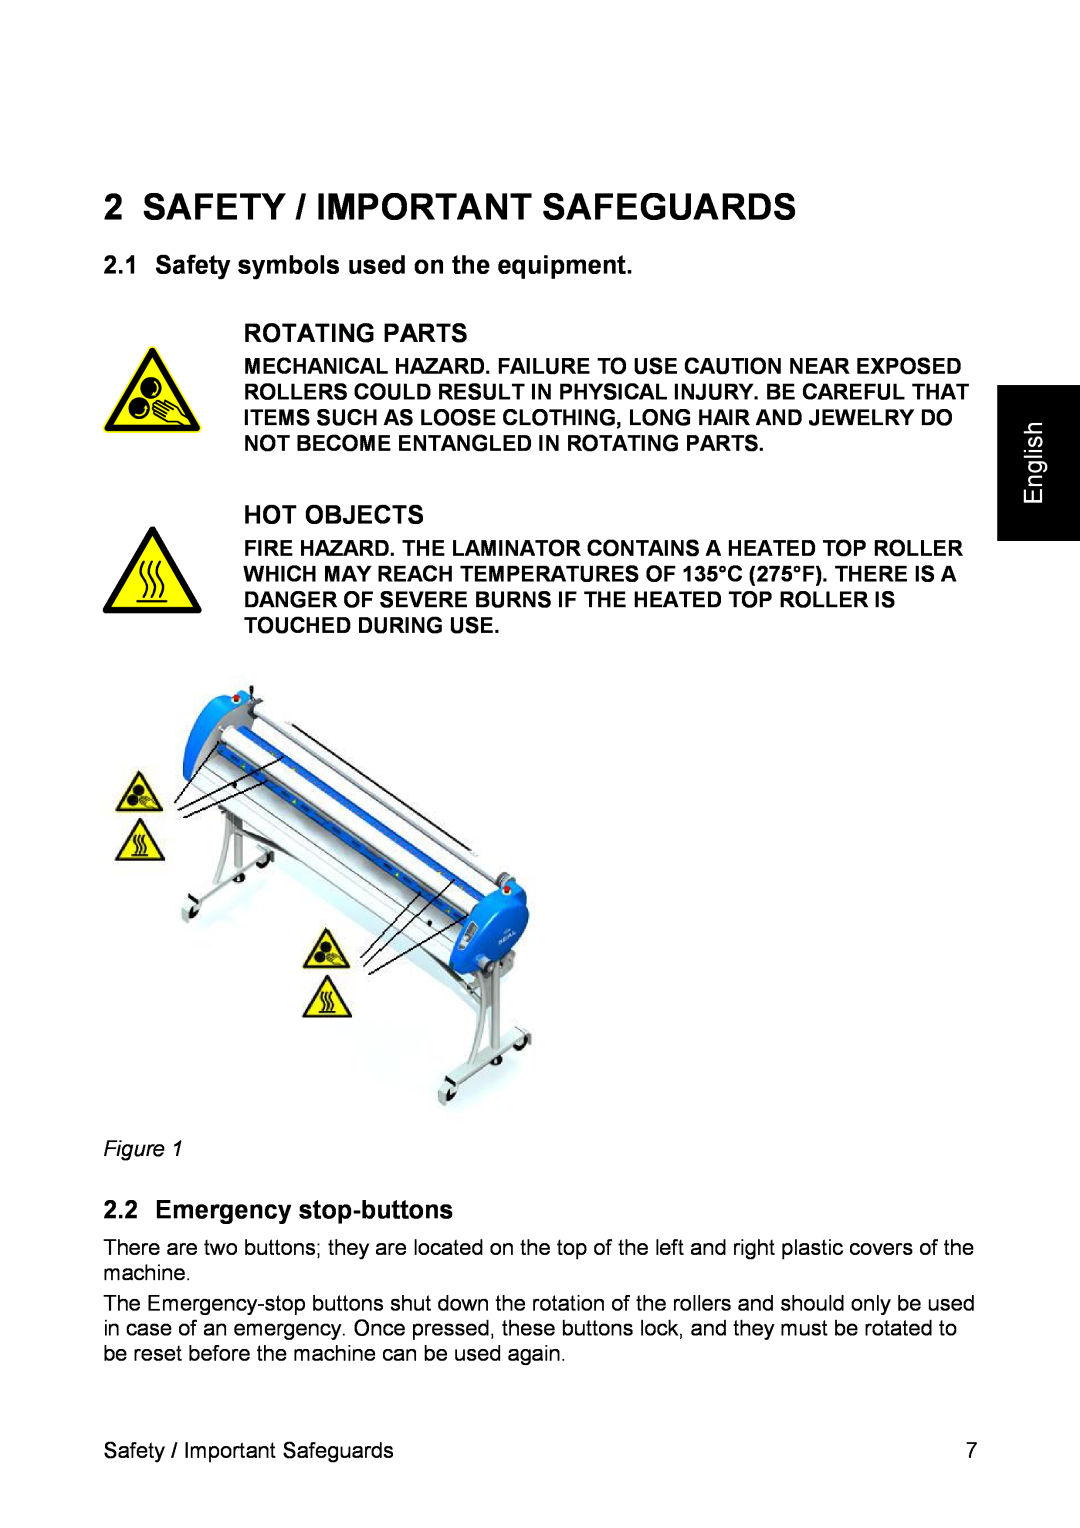 SEAL 44/62 Safety / Important Safeguards, Safety symbols used on the equipment ROTATING PARTS, Hot Objects, English 